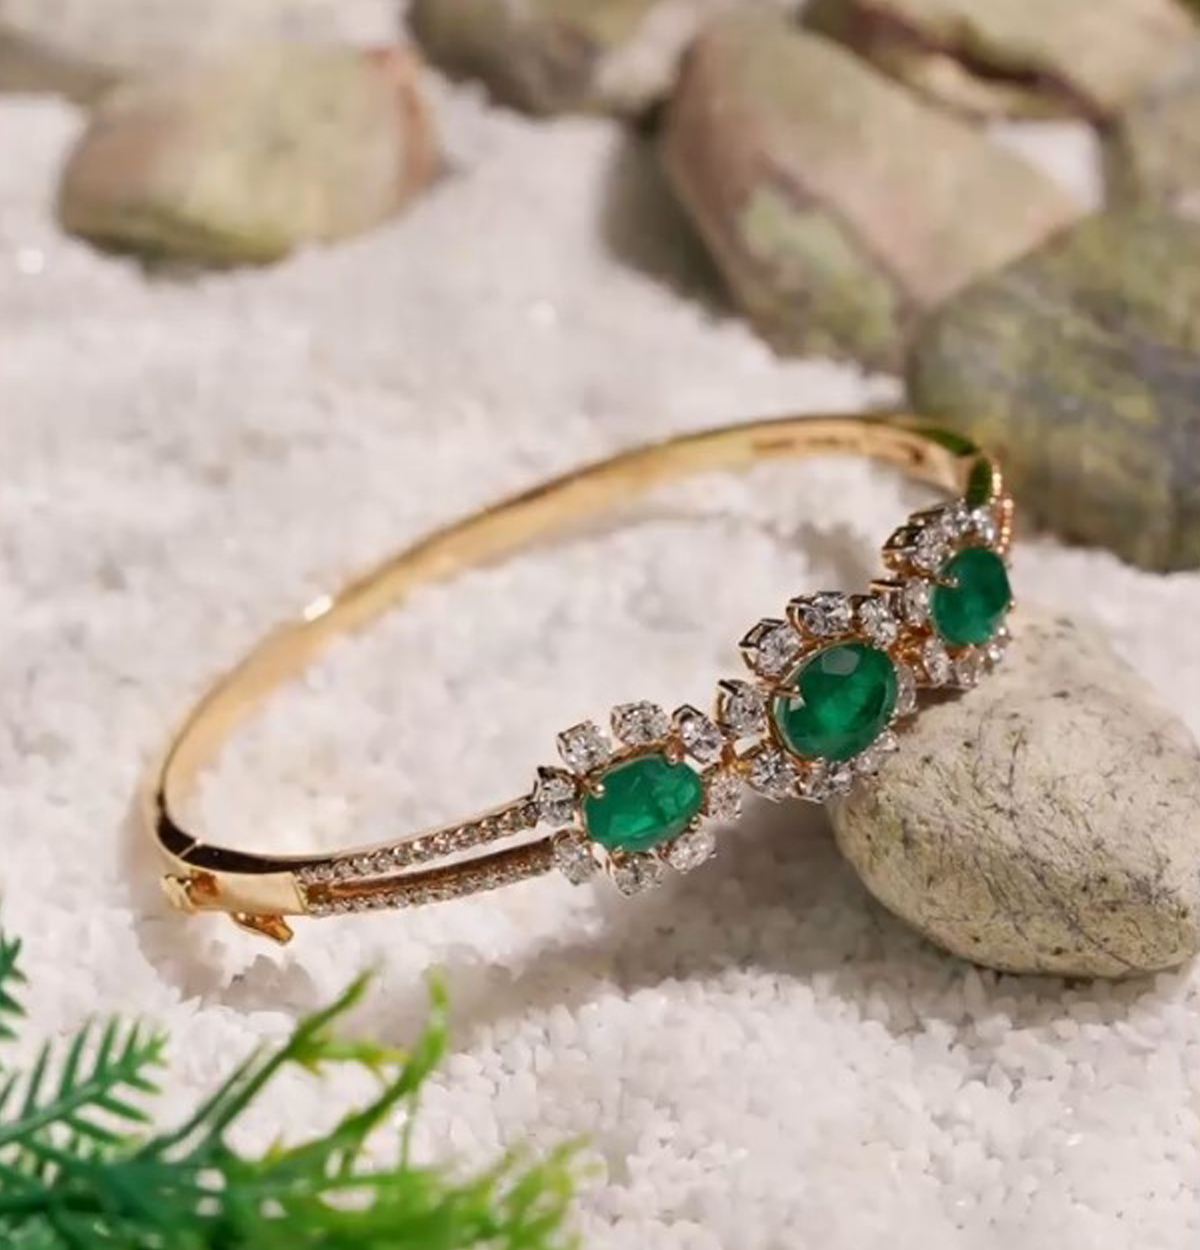 925 Sterling Silver & Diamond With Natural Green Emerald Bracelet For Women  And Handmade Bracelet at Rs 25000 | Second Hand Diamond Jewelry in Jaipur |  ID: 2852047880633